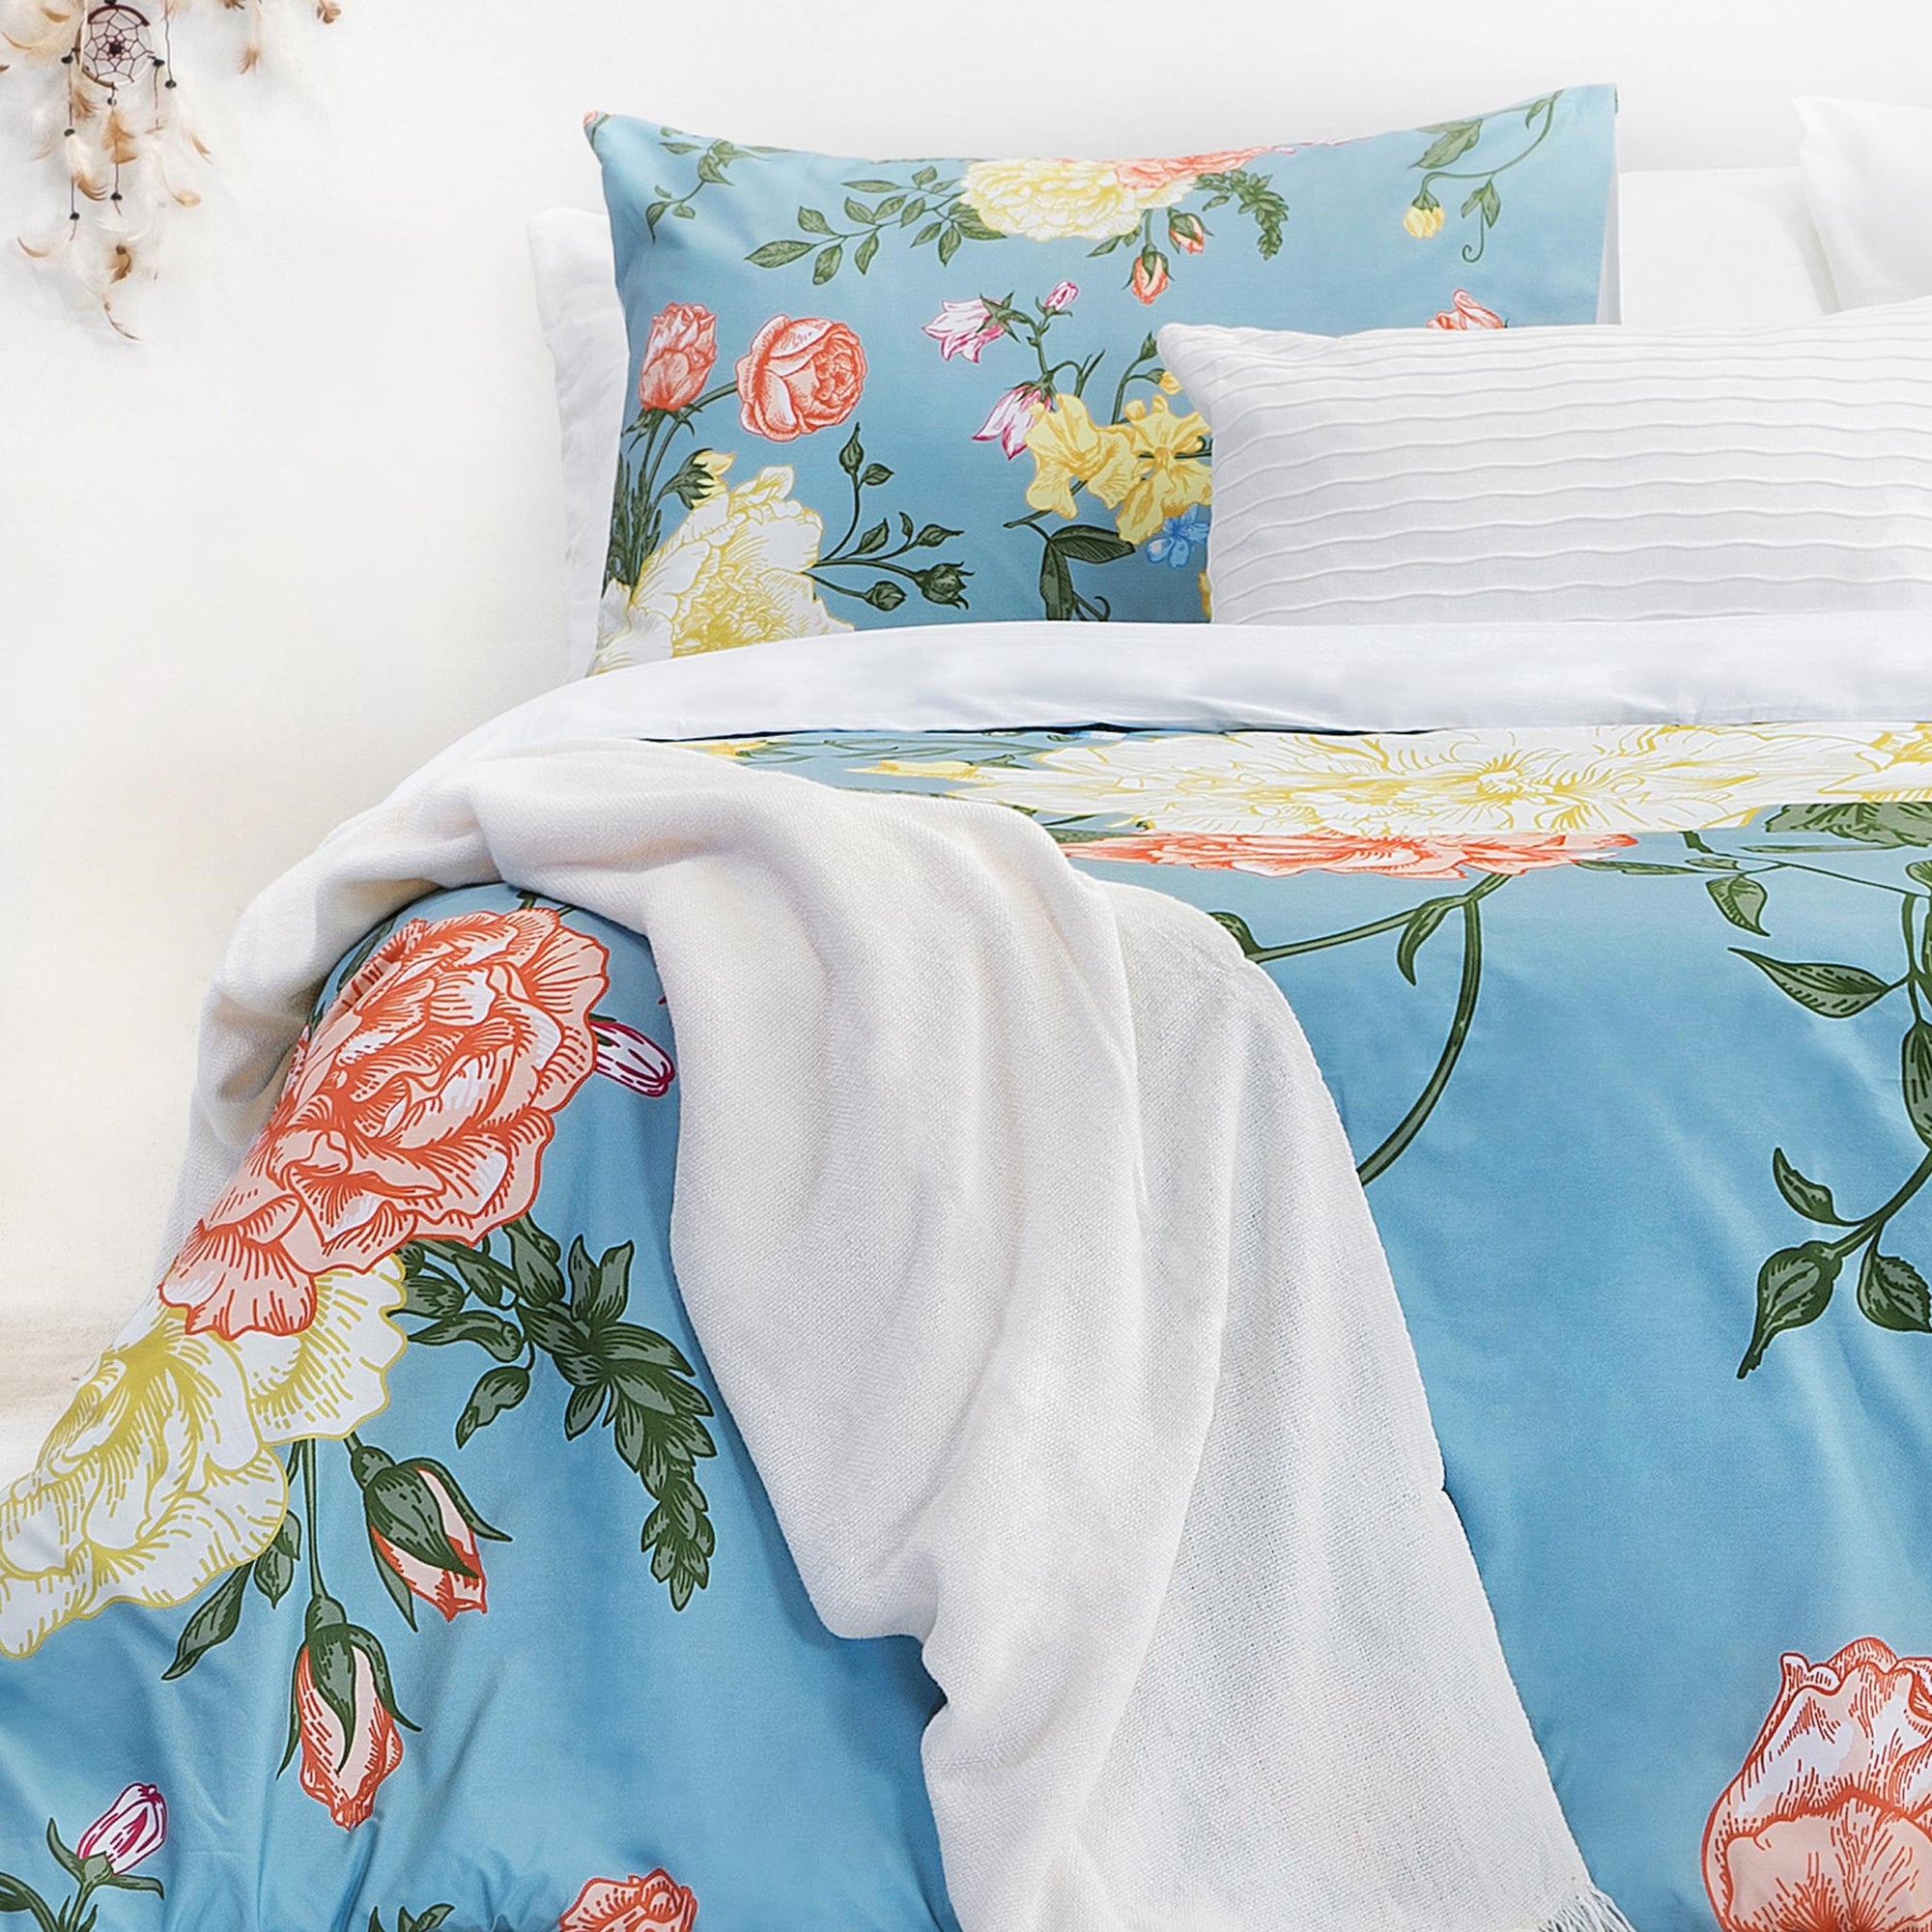 Blue and White Floral Bedding Striped Duvet Cover Set